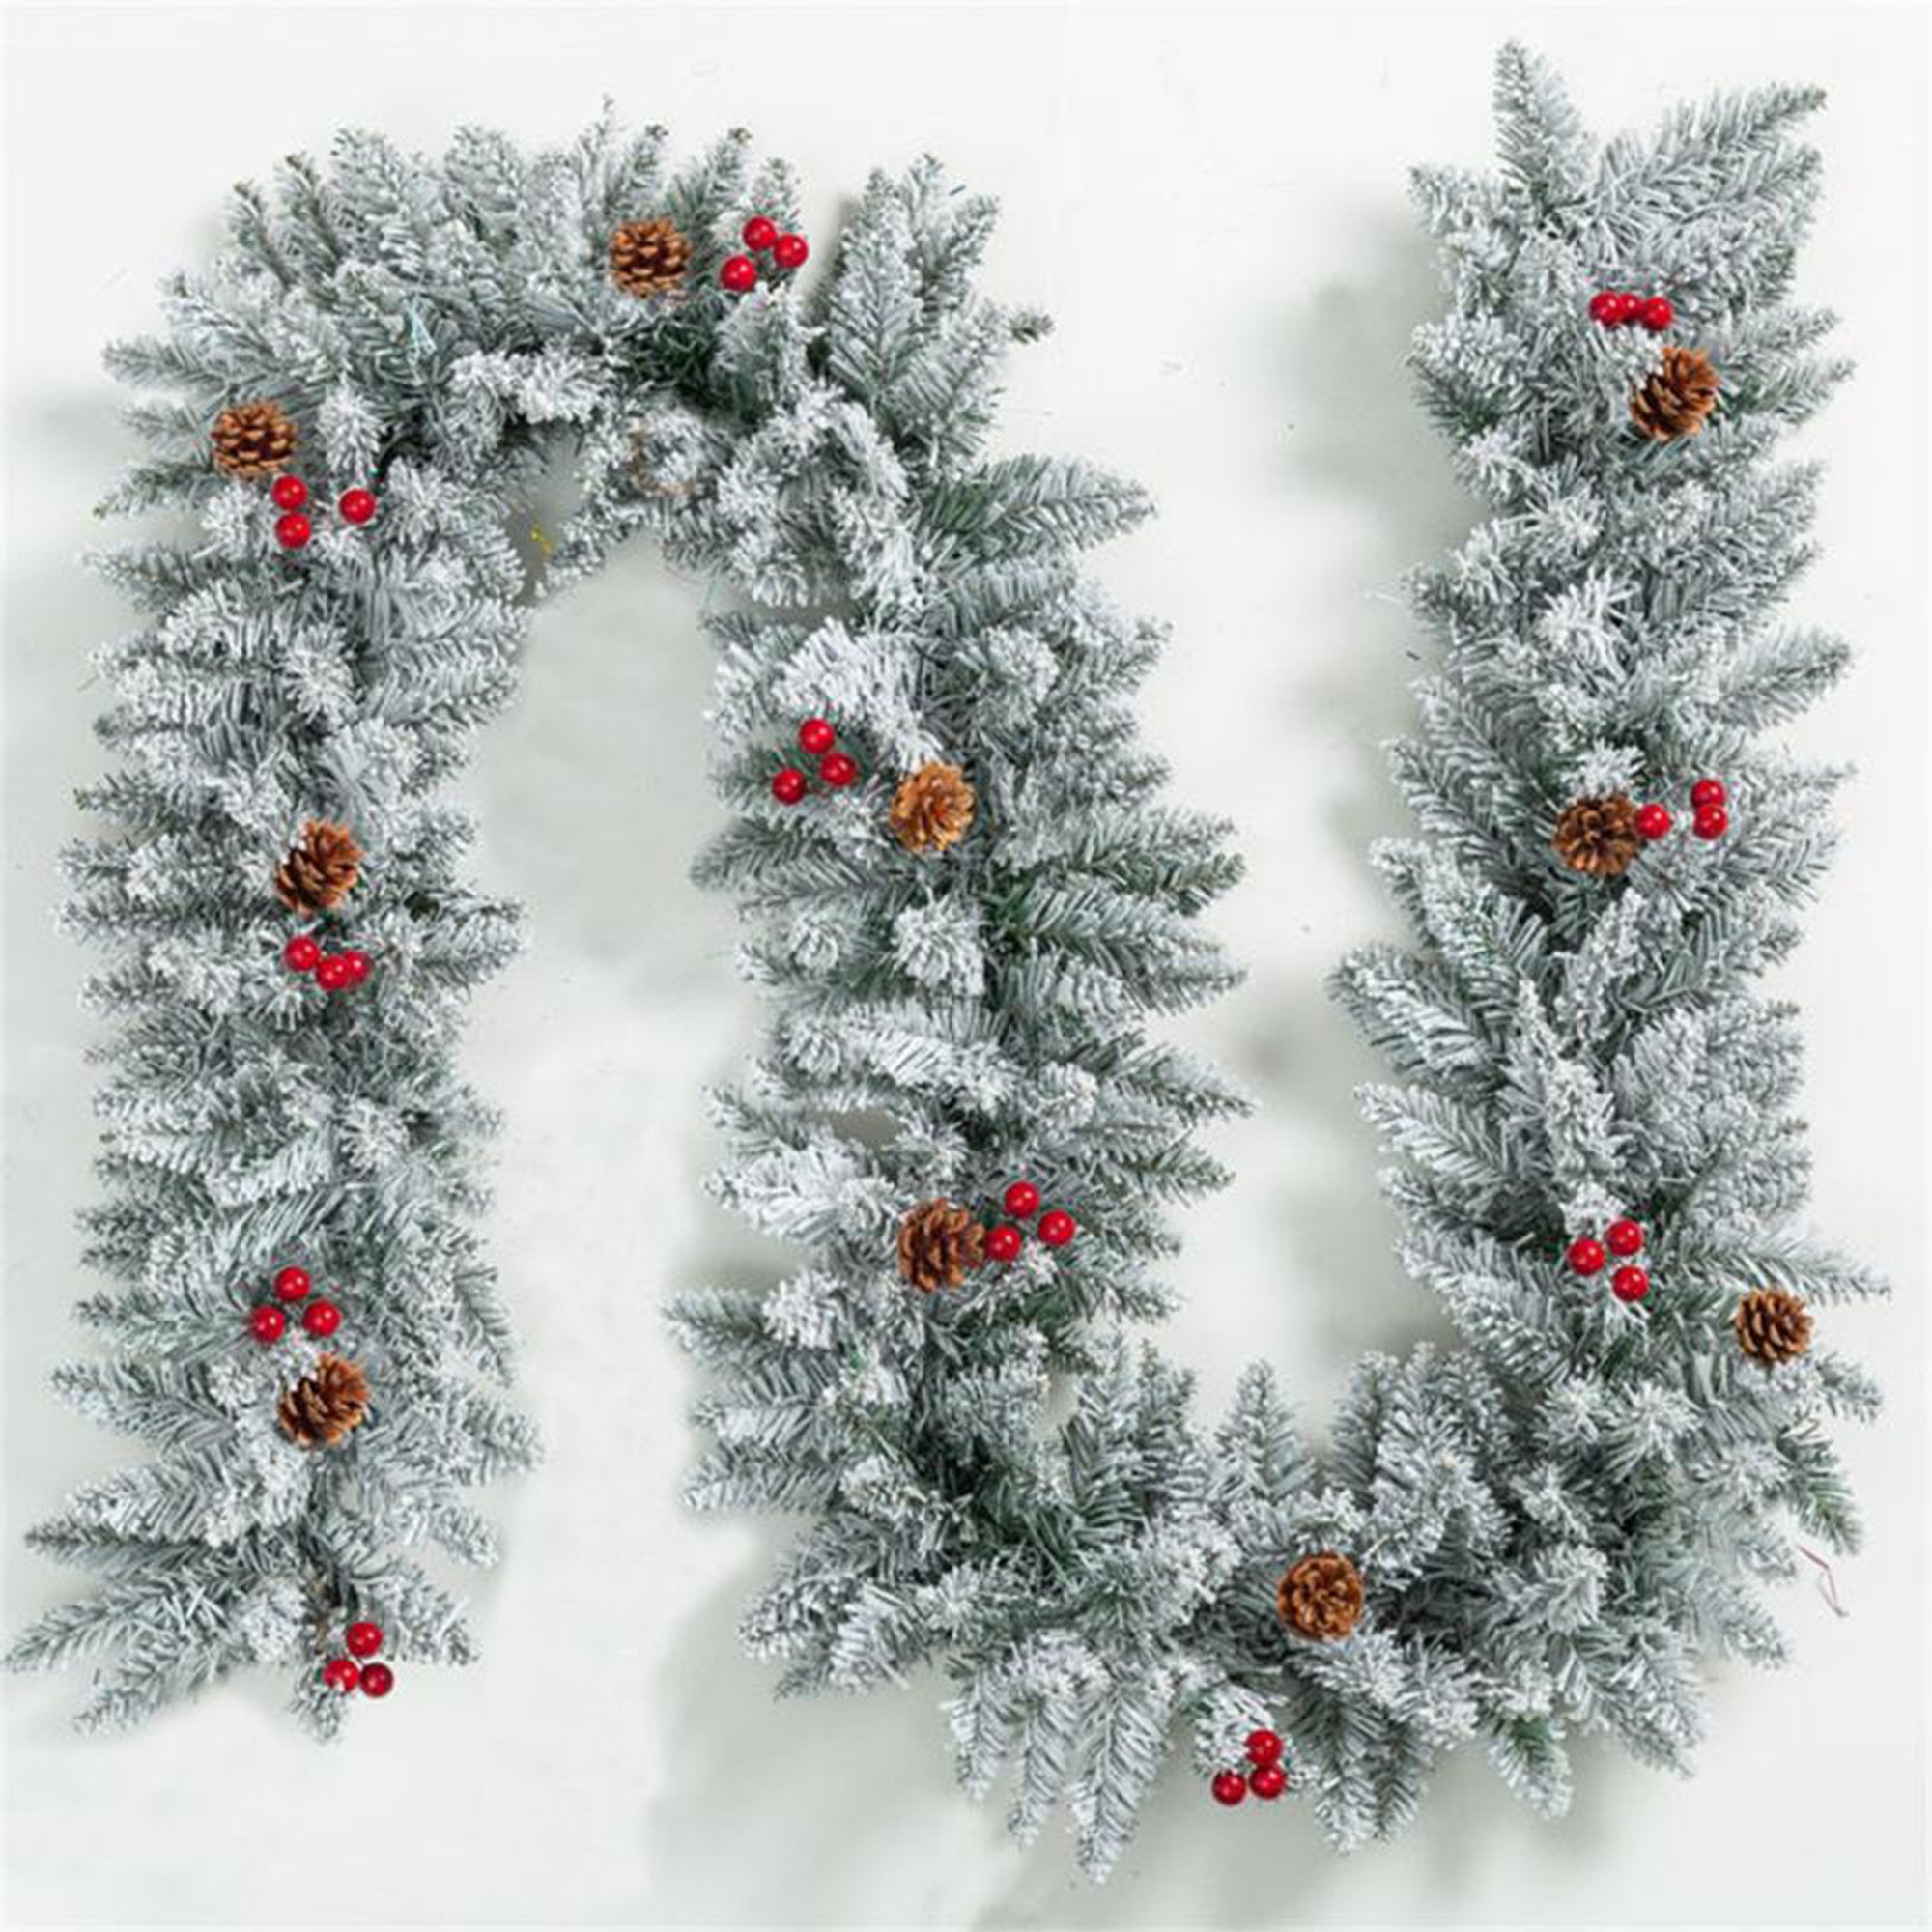 Melliful 8.86 FT Pre-Lit Christmas Garland with Lights for Outdoor Indoor Xmas Decoration Home Fireplace Front Decor